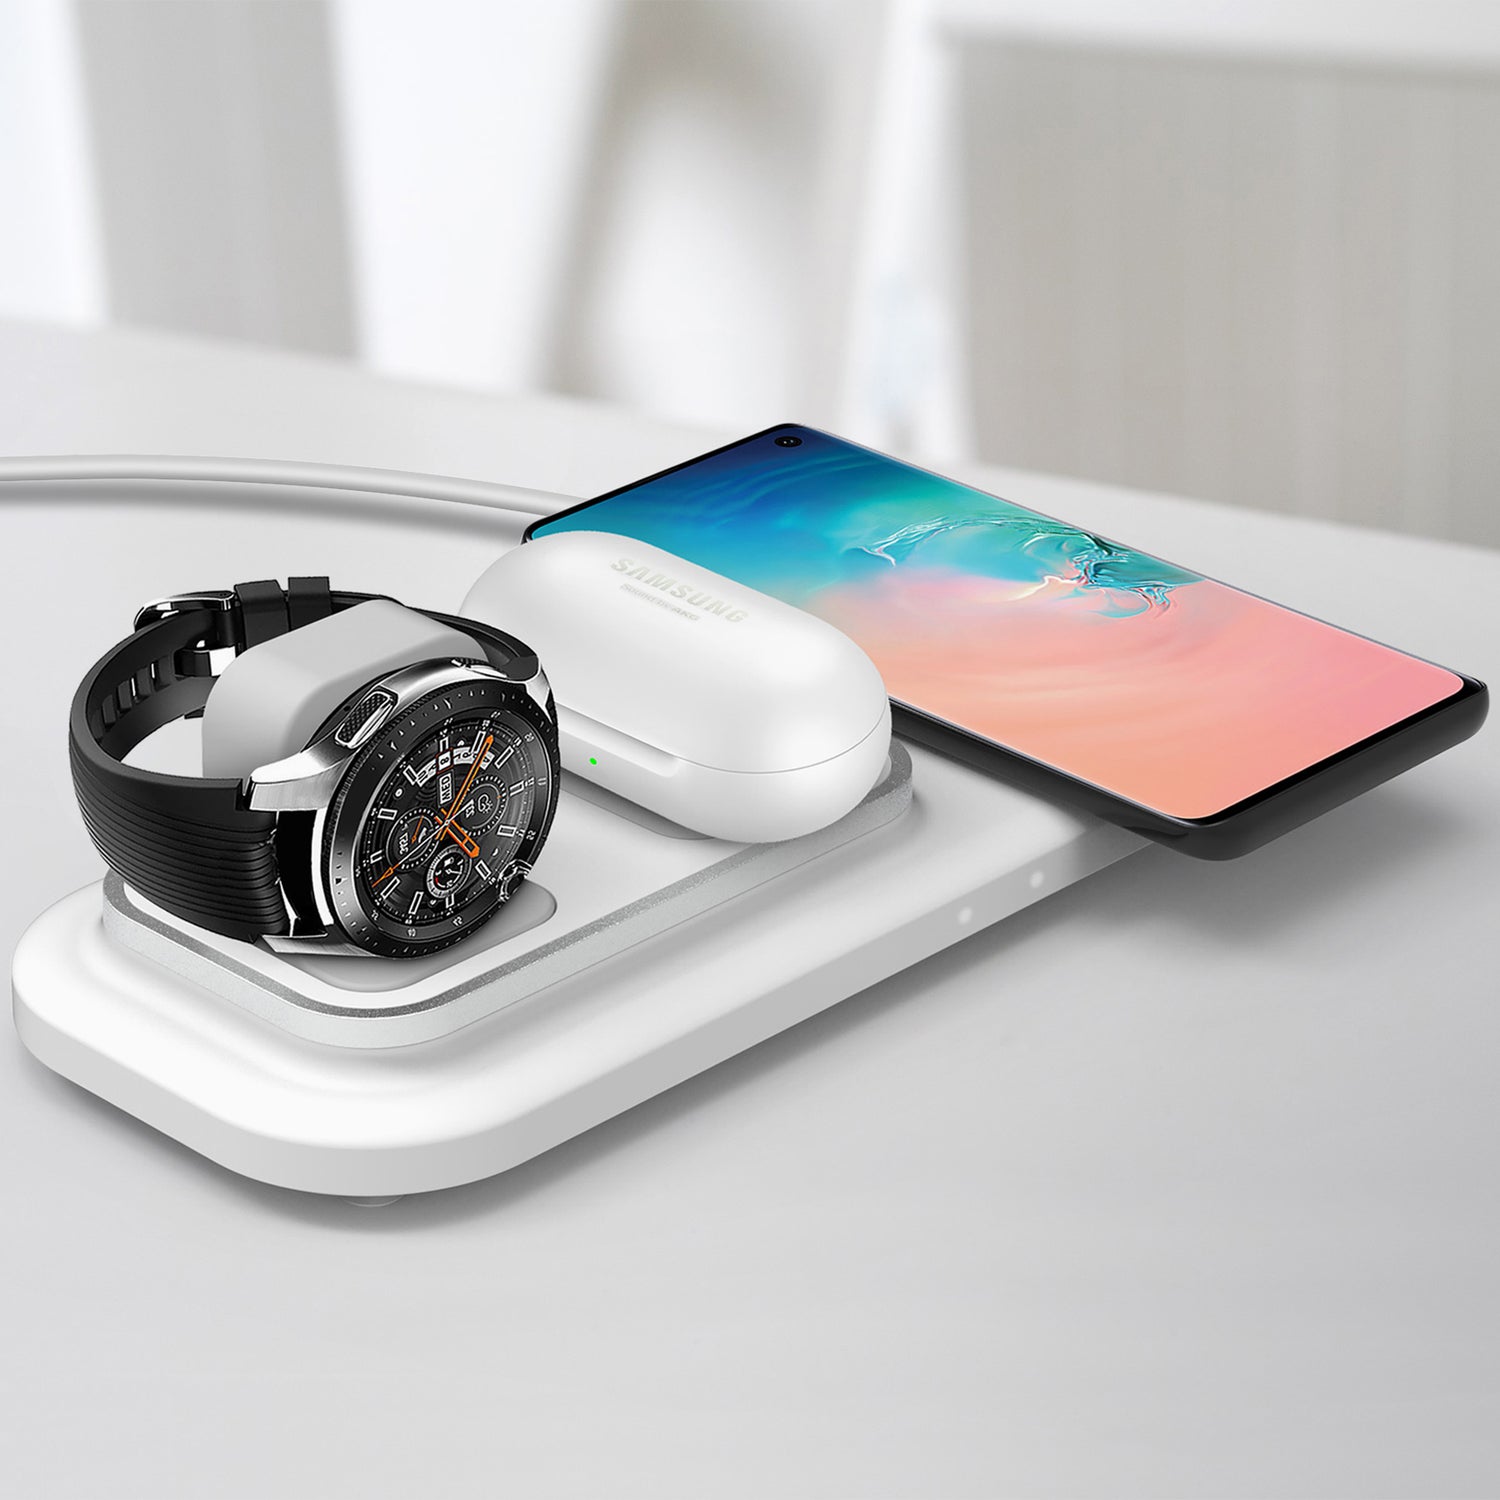 RGBTRON DT-X3 3-in-1 Wireless Charger (Wireless Charging Station for iPhone, Apple Watch, AirPods) Wireless Charging Dock, iPhone Charging Dock, Apple Watch Charging Stand